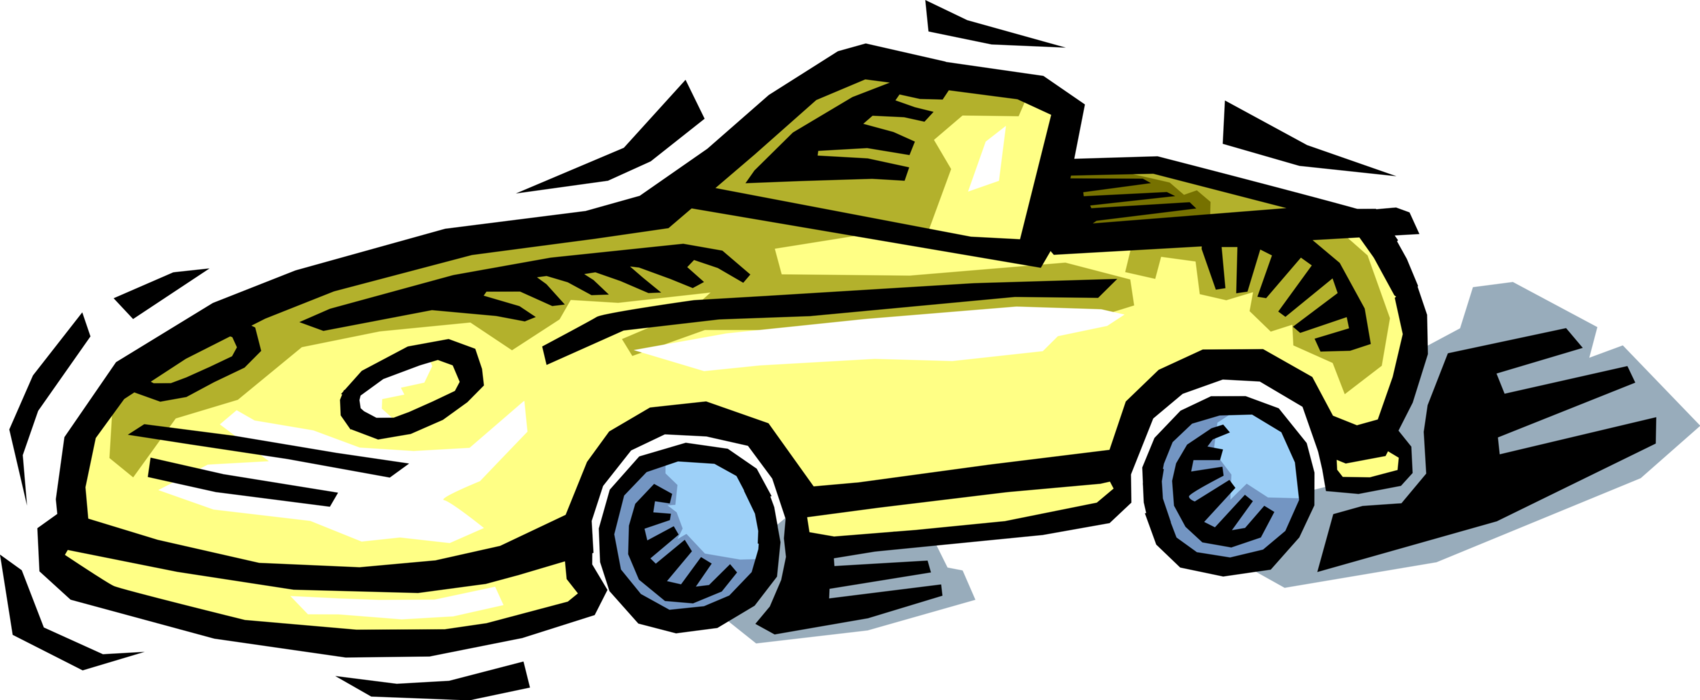 Vector Illustration of Convertible Automobile Motor Vehicle Car